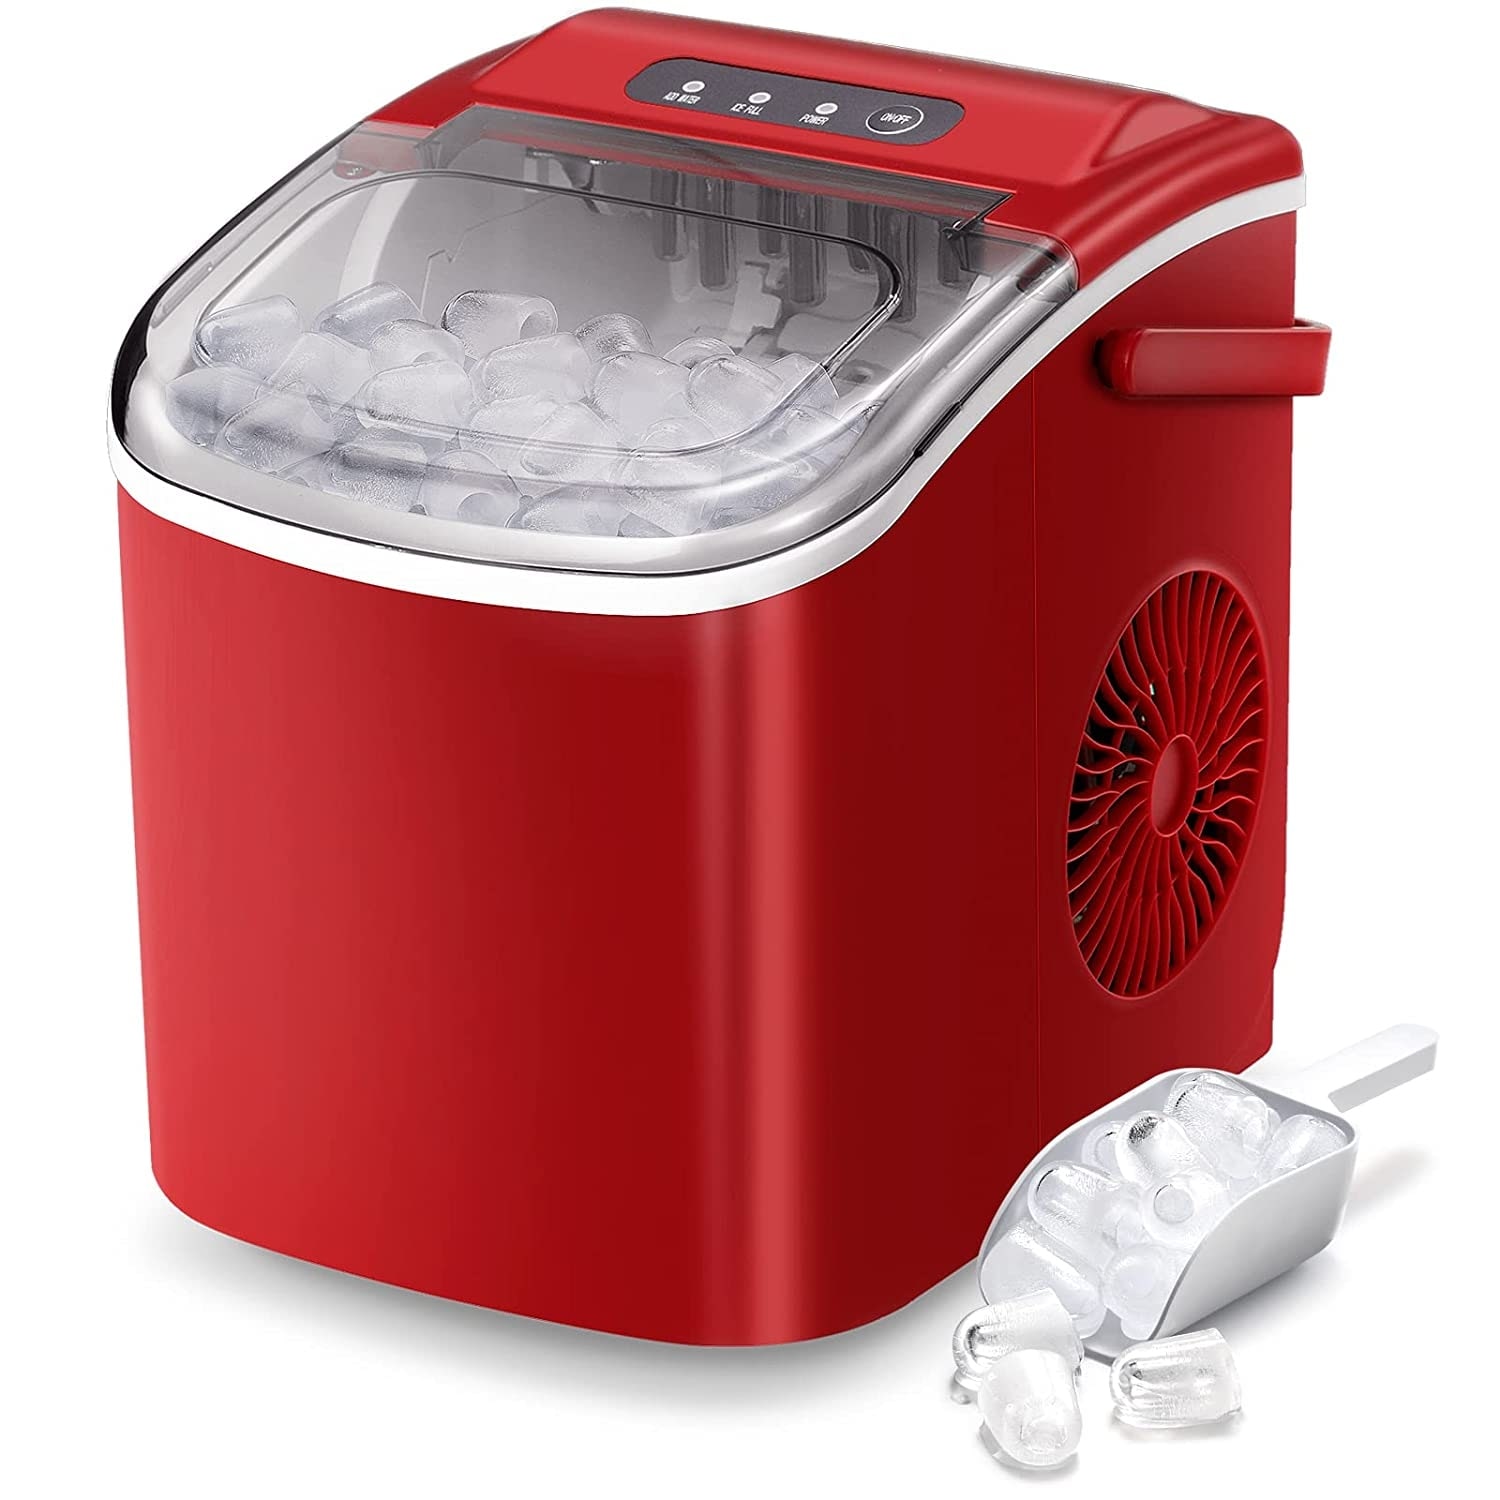 Newair 44lb. Nugget Countertop Ice Maker with Self